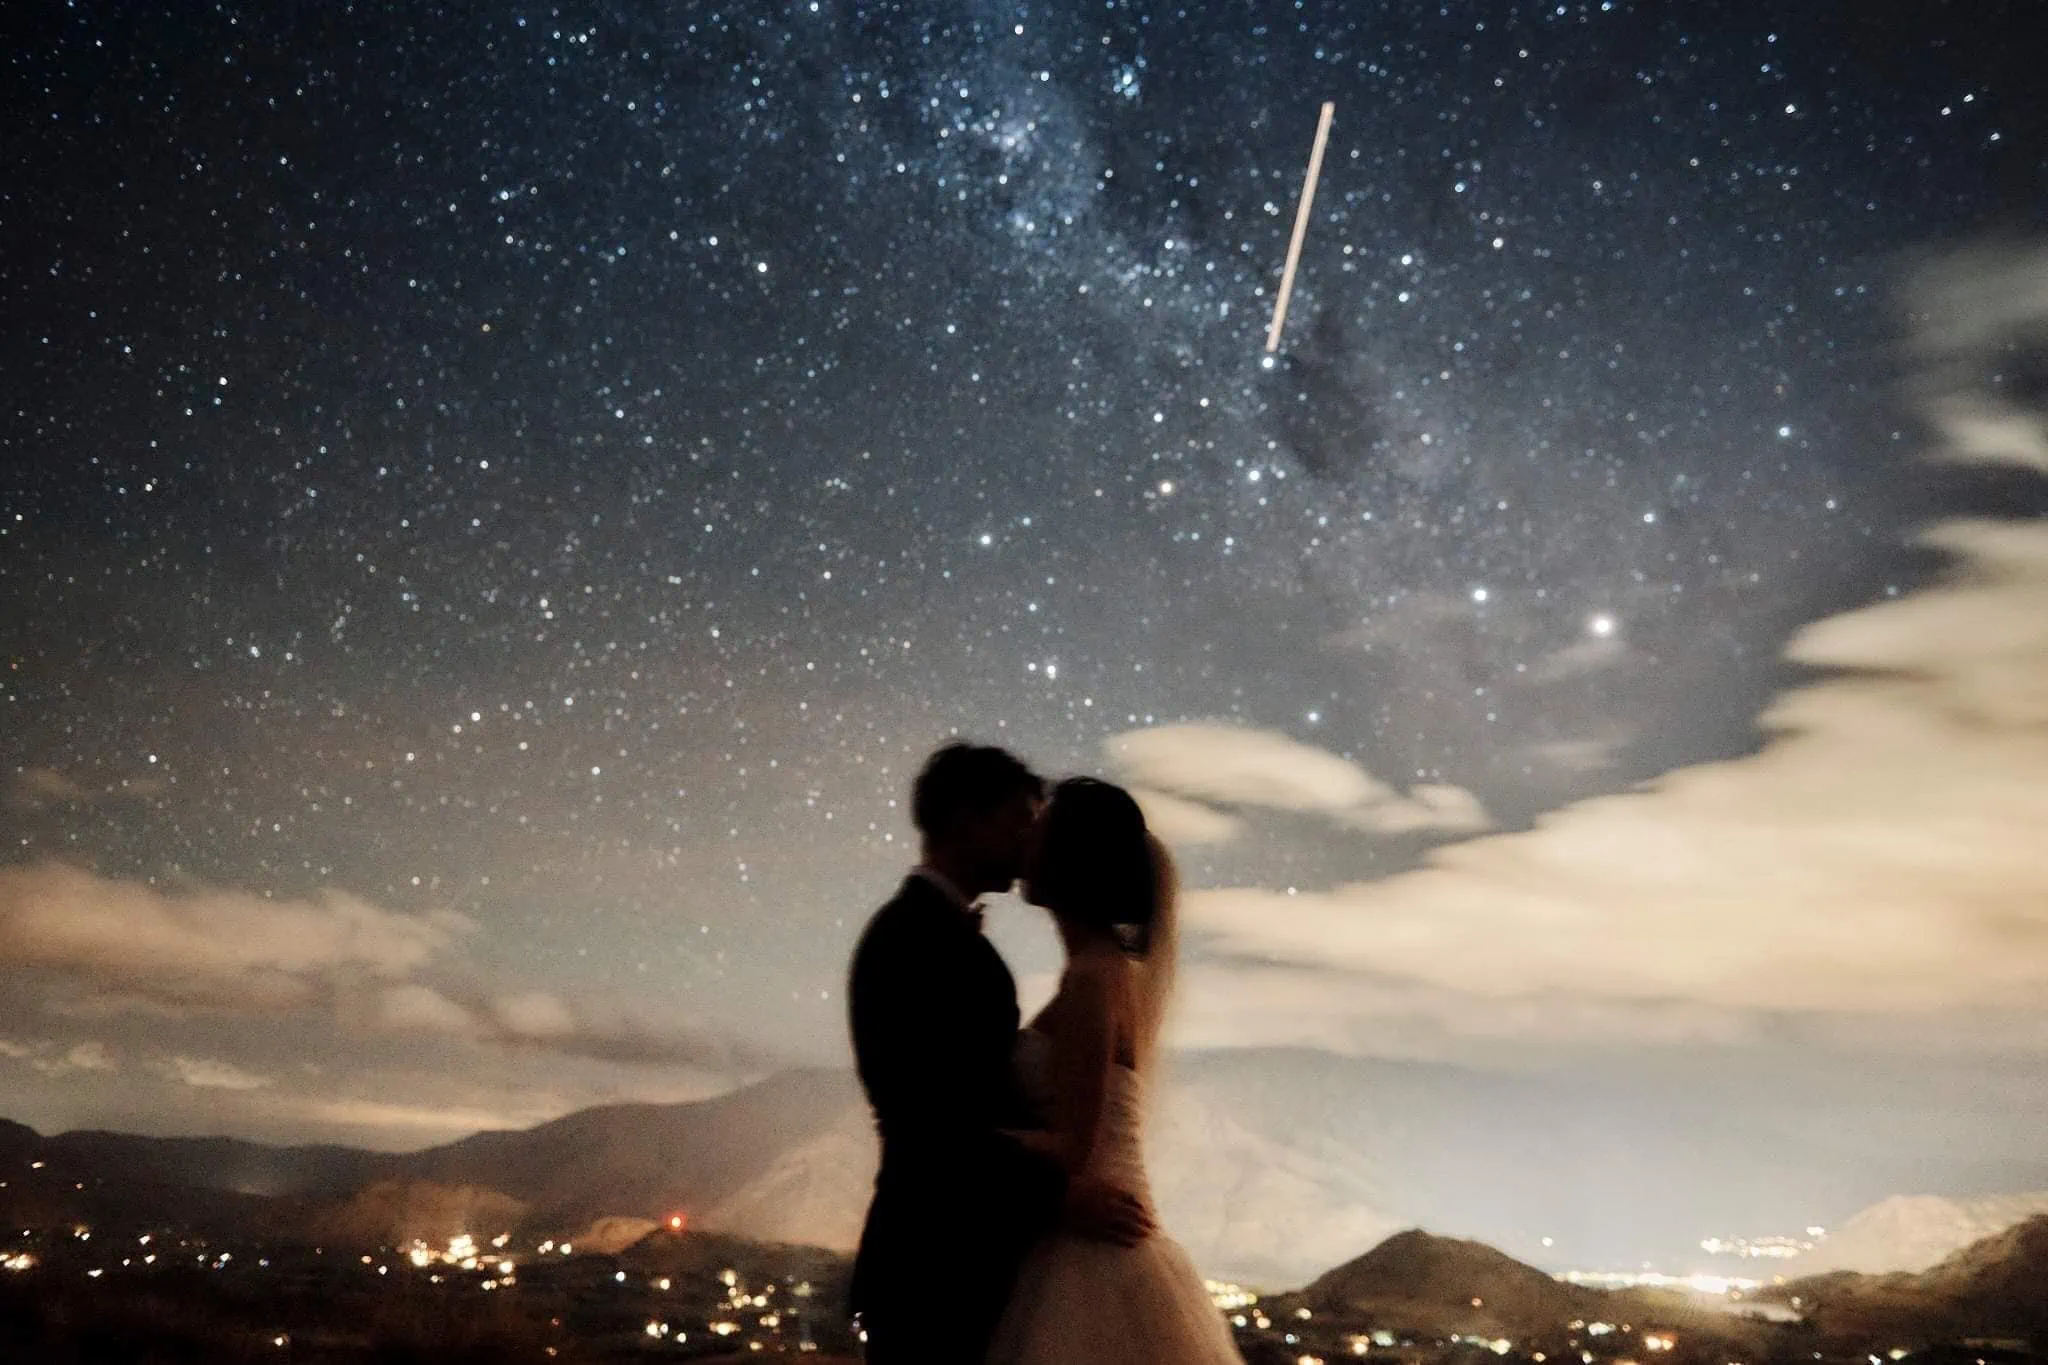 Queenstown New Zealand Elopement Wedding Photographer - A mesmerizing starry night shoot showcasing a passionate moment between a bride and groom.